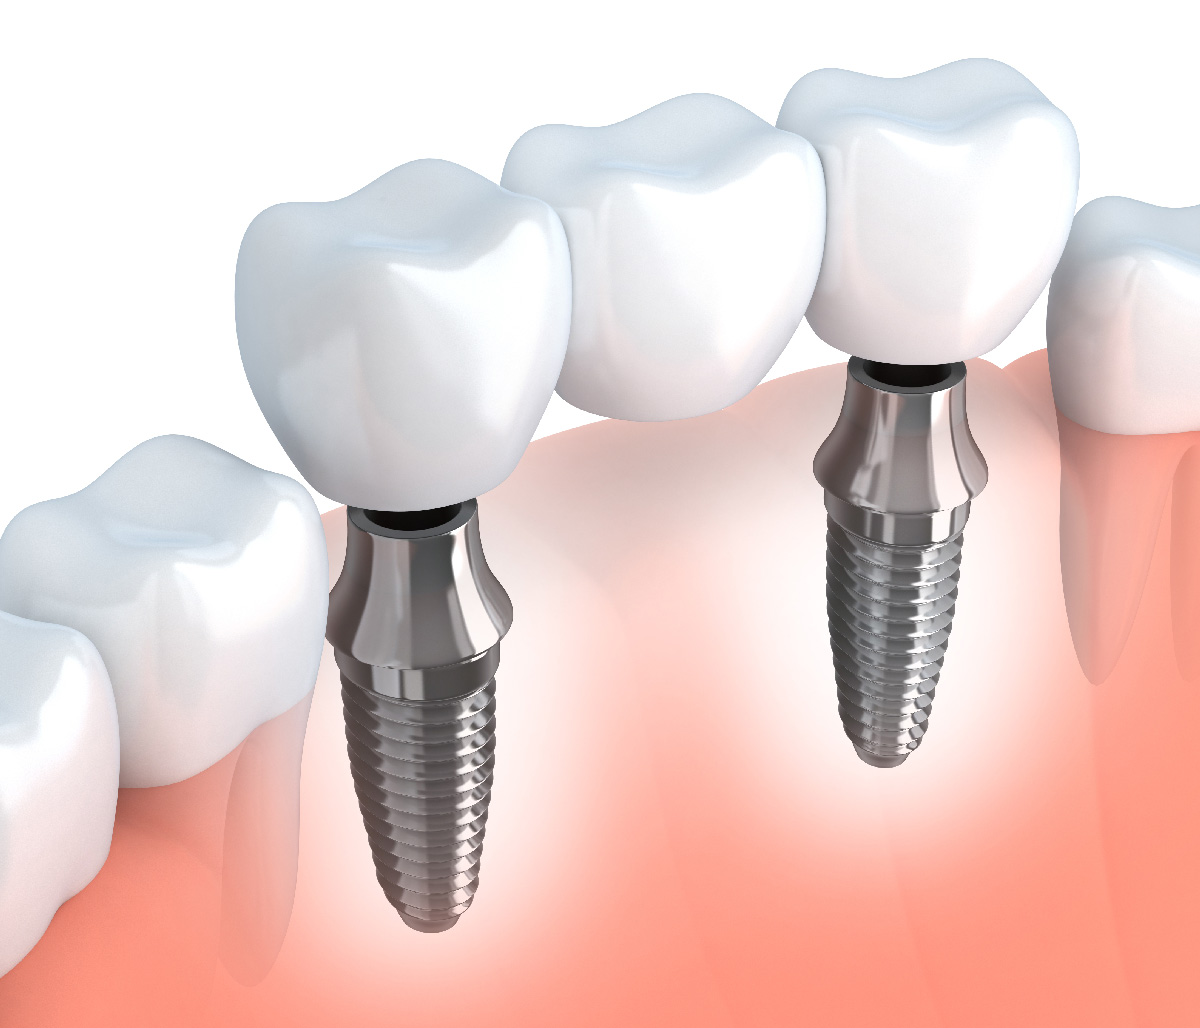 What Is The Single Tooth Implant Cost Near, Me In Bloomington